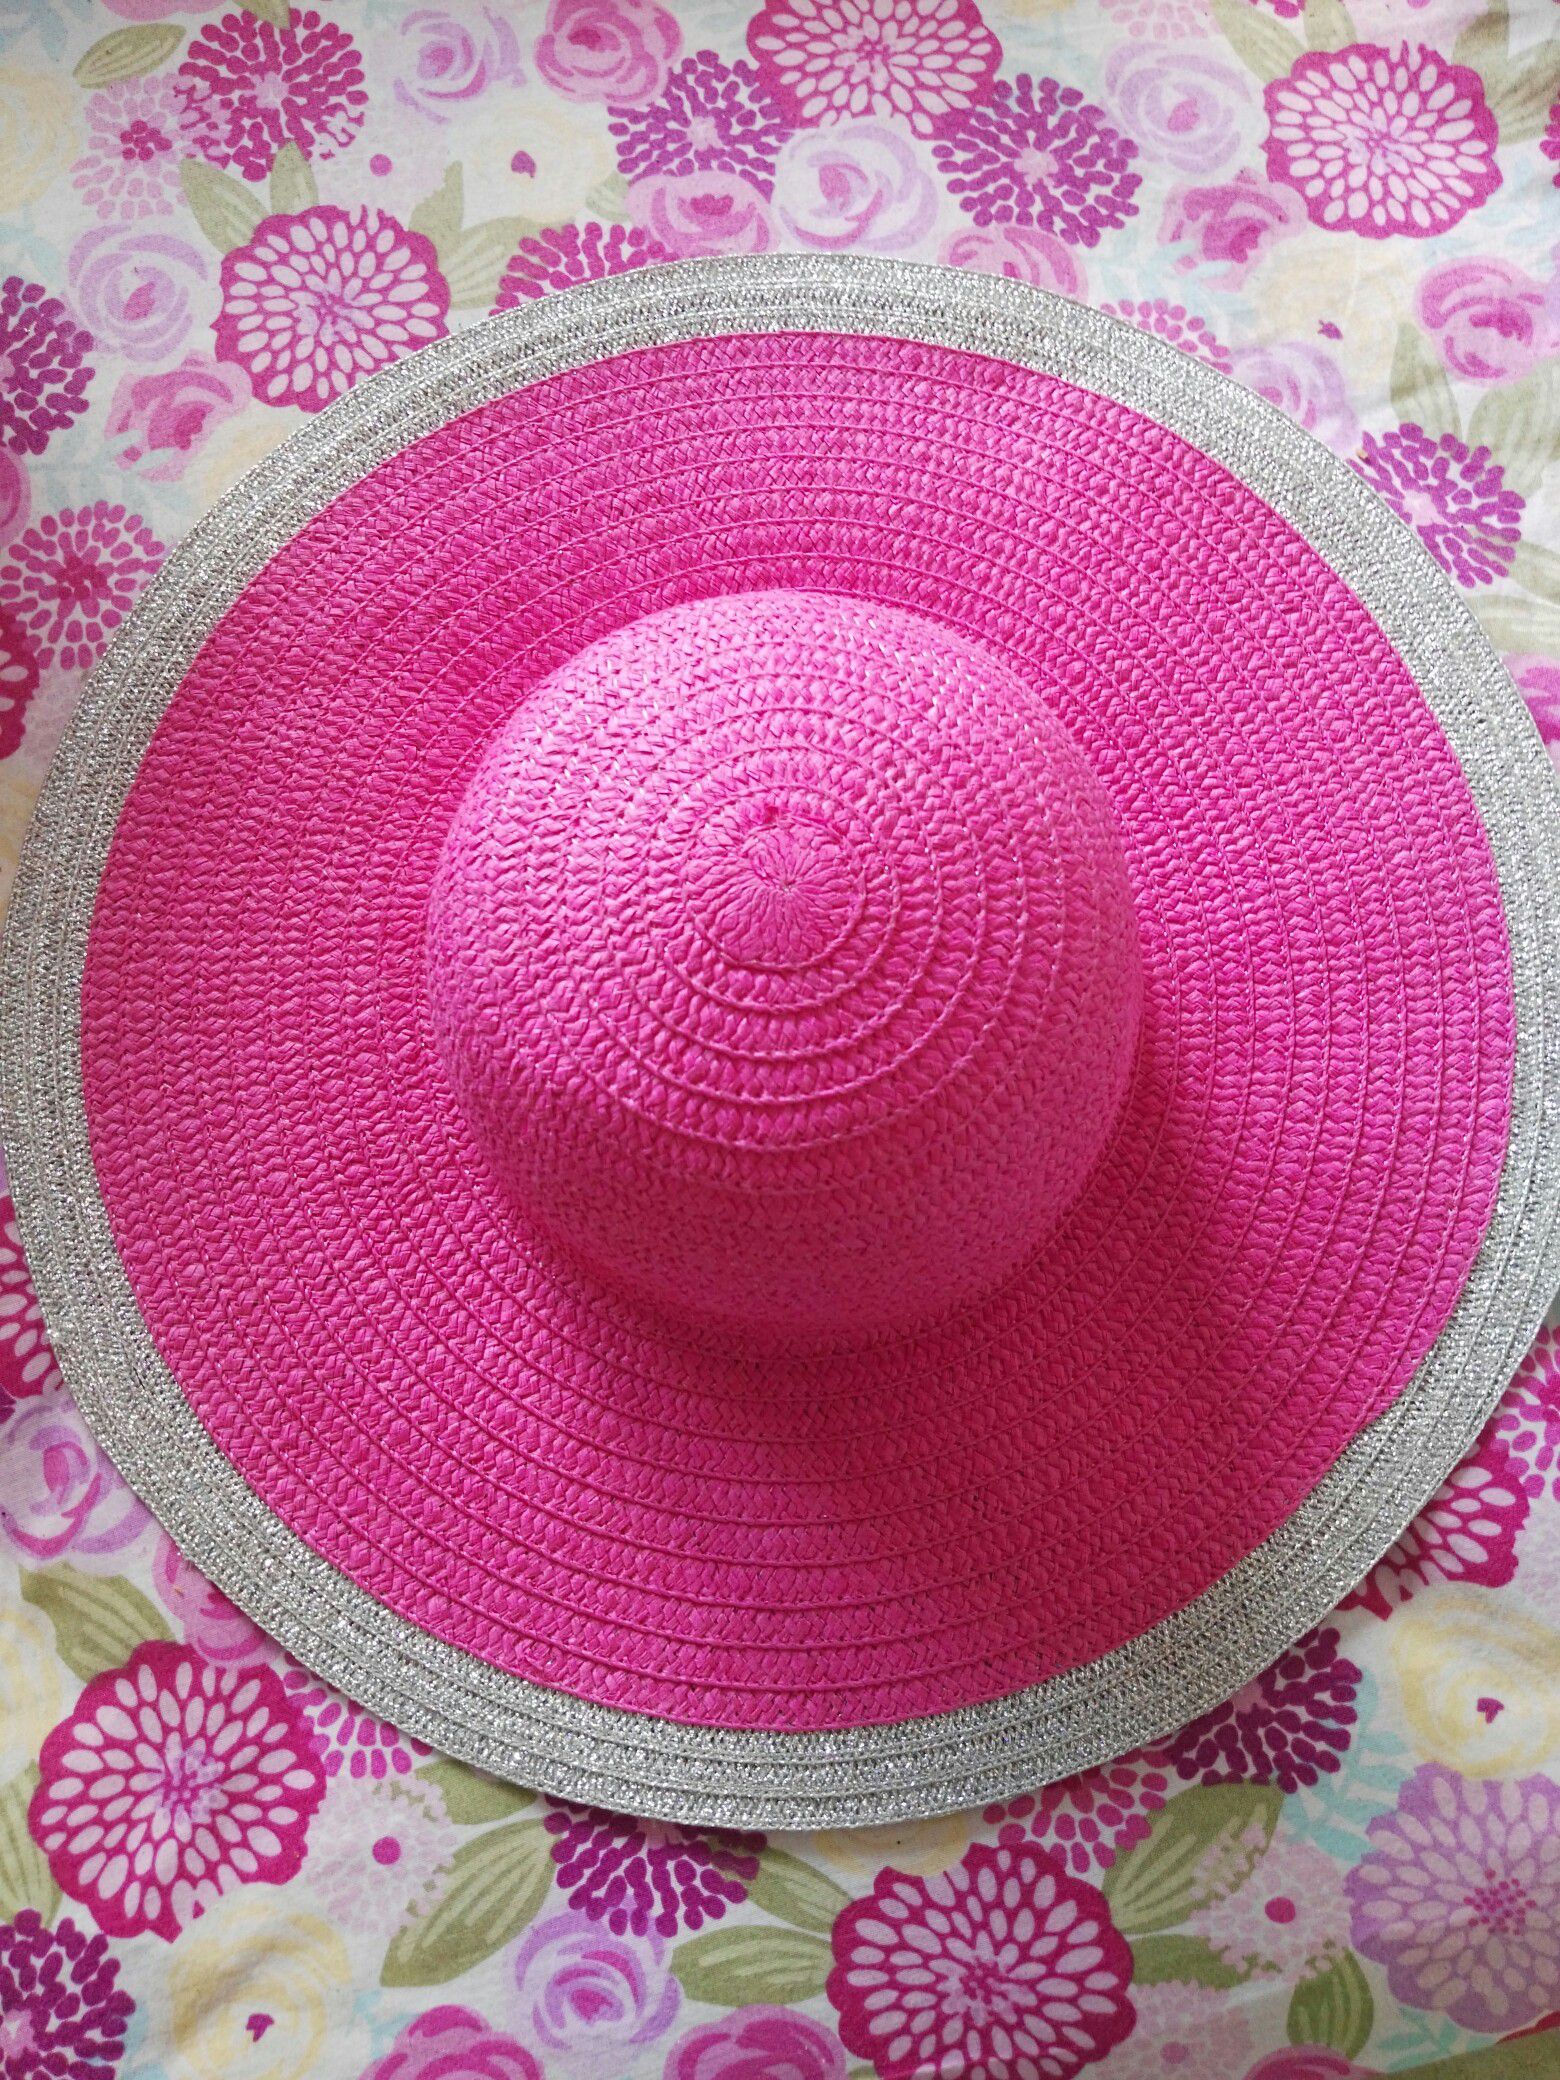 Big beautiful pink and silver hat. Very Chic. Hit me with your best price!!